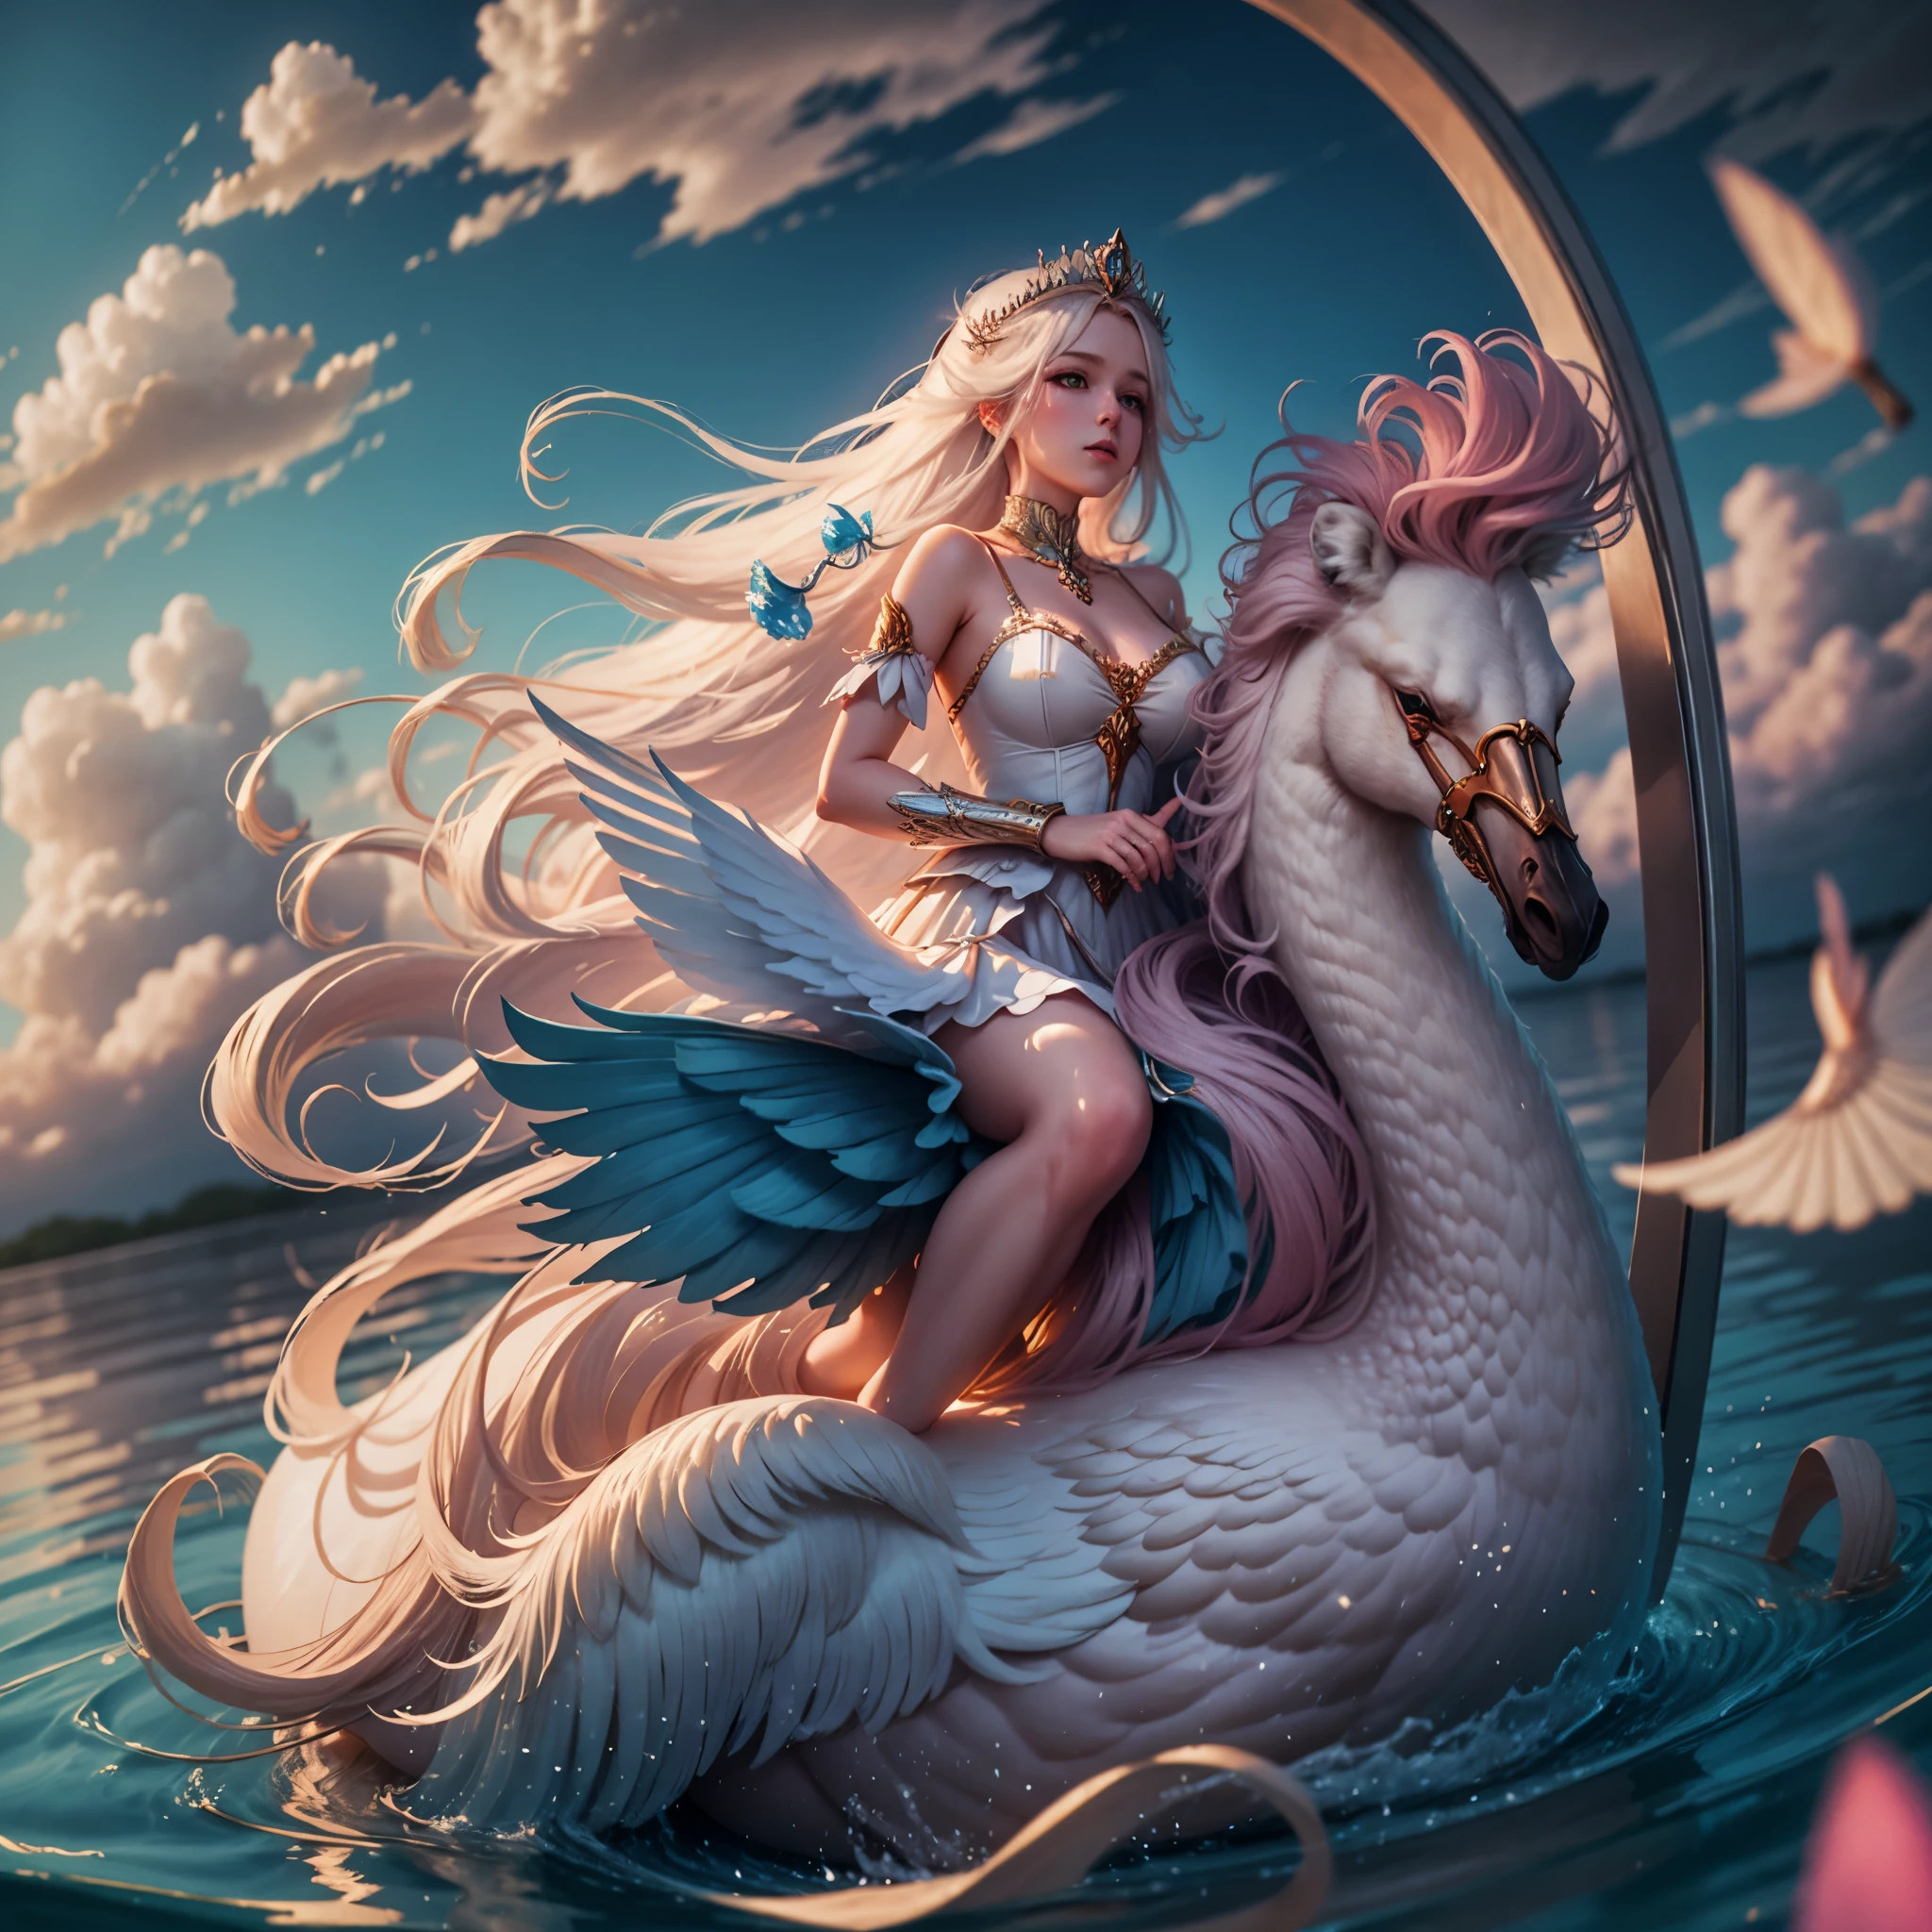 A White two leg Swan ((floating in water)), with flowing wavy mane of white flowing hair afloat with its swan head, a narrow swan beak and a saddle for ridding, a pink fairy queen with short slender legs riding on its swan back like a jockey, of a cotton candy, pink hearts, glass hearts, Queen of hearts, glass swan in a bottle, 36k resolution, fantasy art style, a blue sky and water, a blue day,